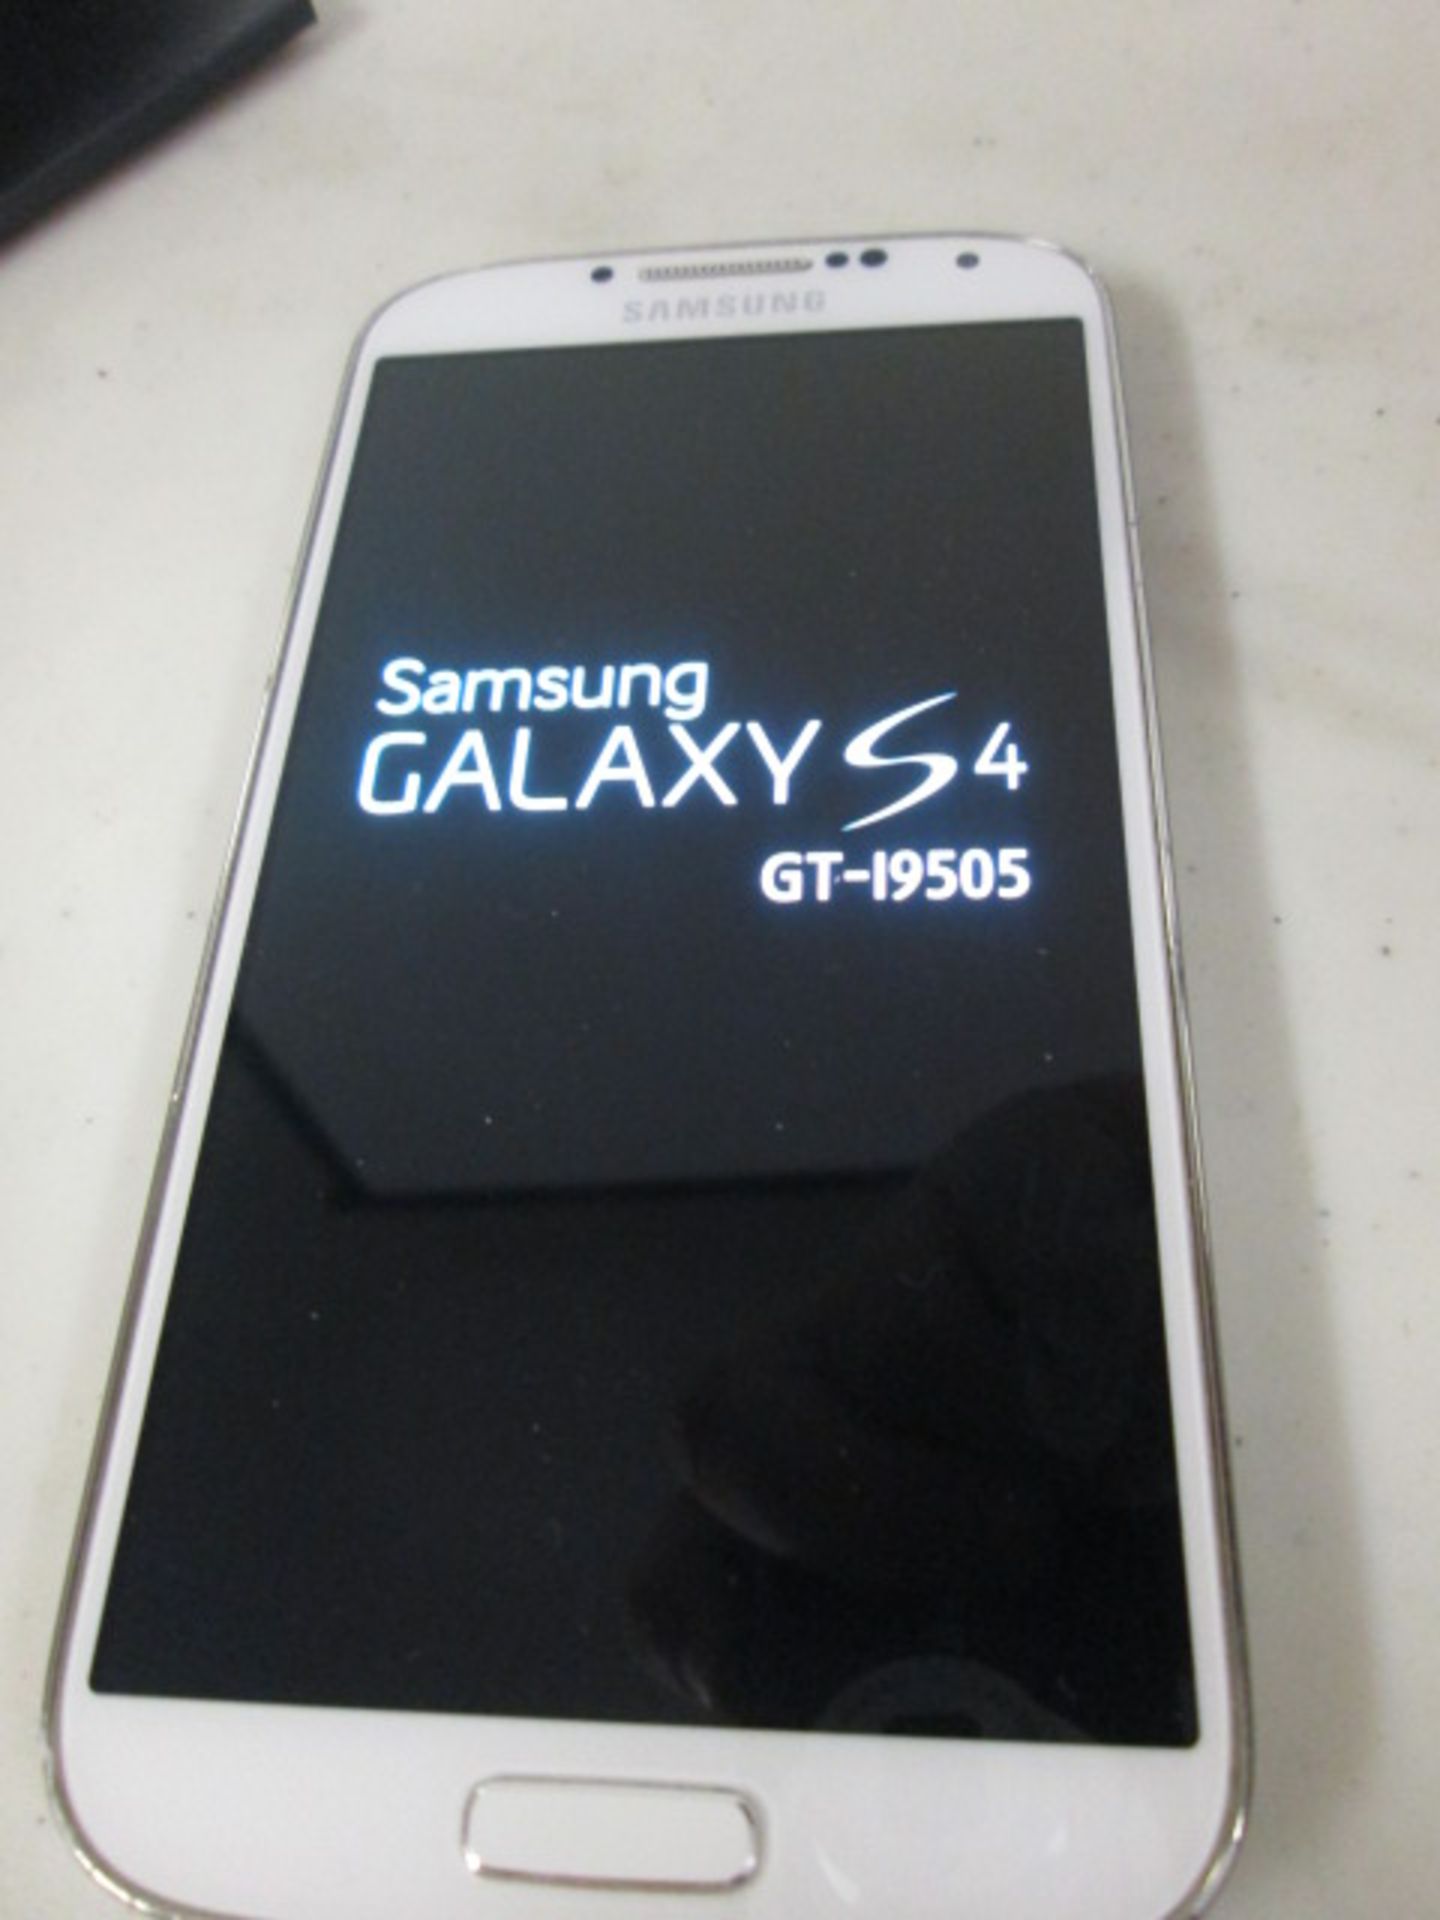 Samsung Galaxy S4 Mobile Phone, Model GT-19505, 16GB. Colour White. Comes with Charger. Locked to